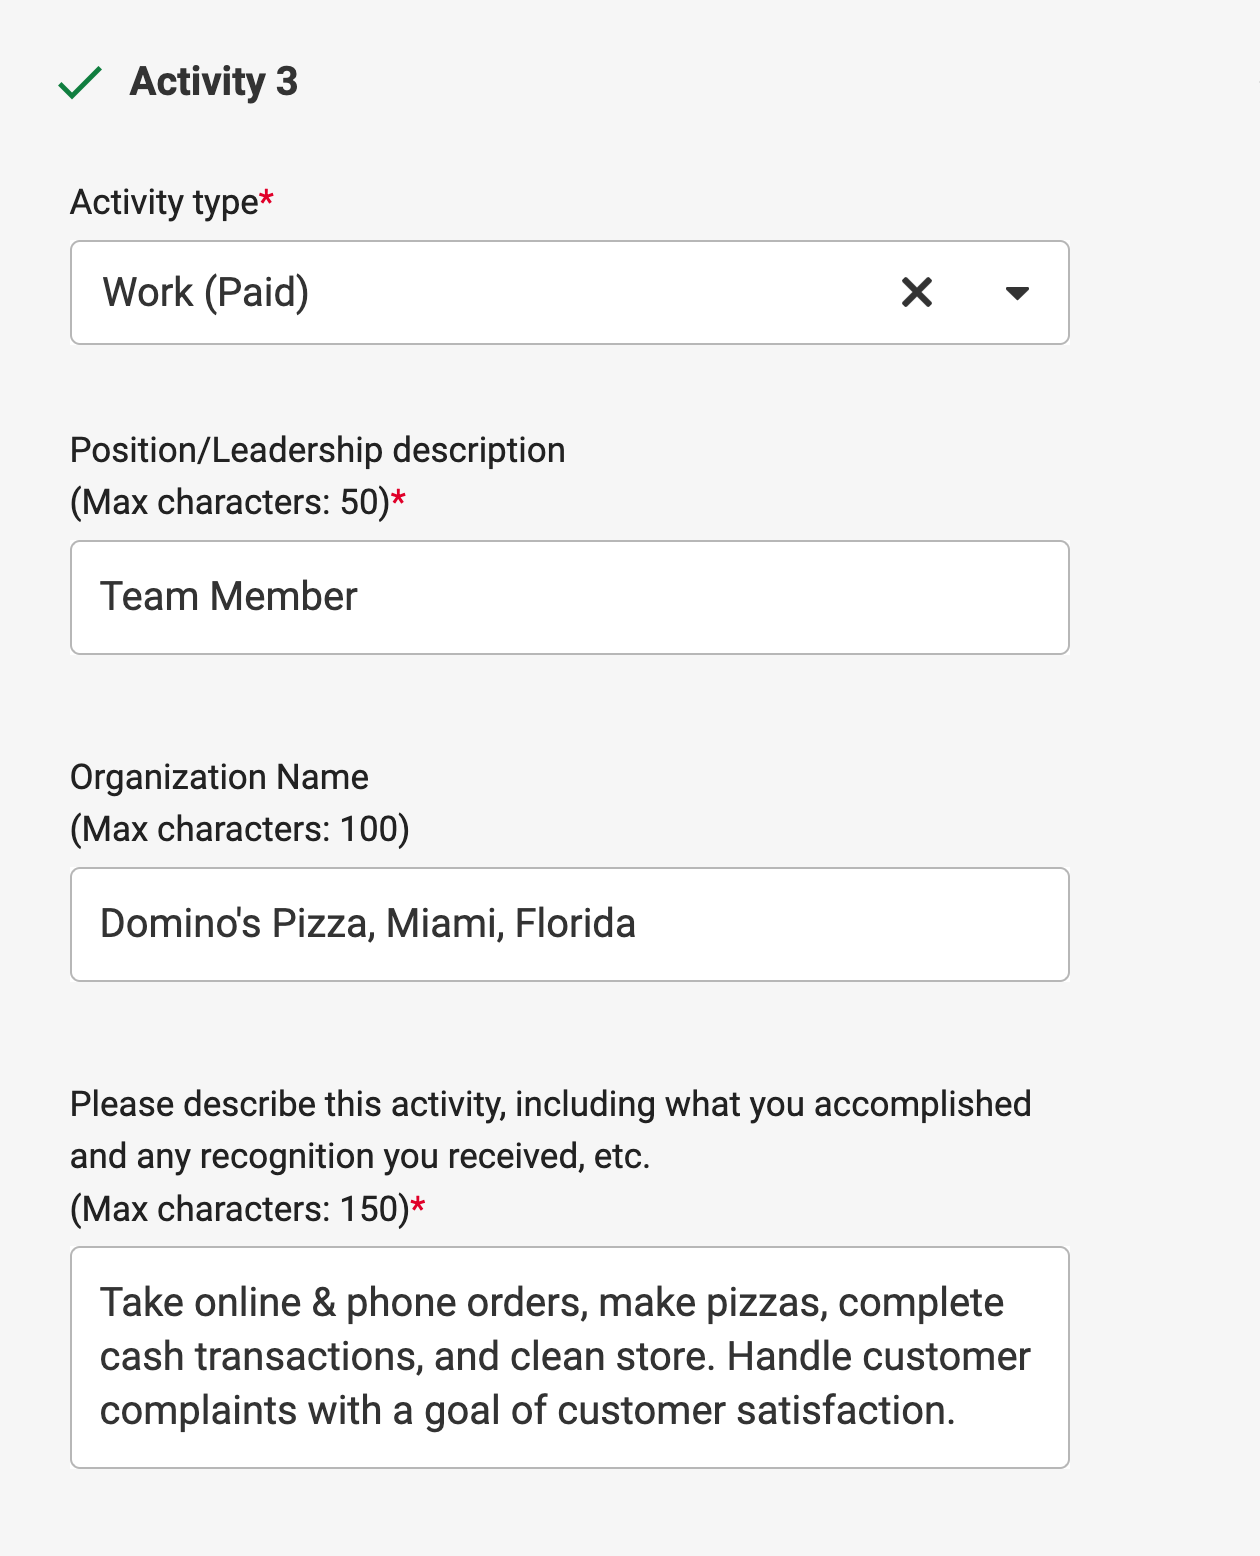 ctivity 3 example: Activity Type field: Word (Paid). Position description field: Team Member. Organization Name: Domino's Pizza, Miami, FL. Describe this activity field: Take online and phone orders, make pizzas, complete transactions, and clean store. Handle customer complaints with goal of customer satisfaction.